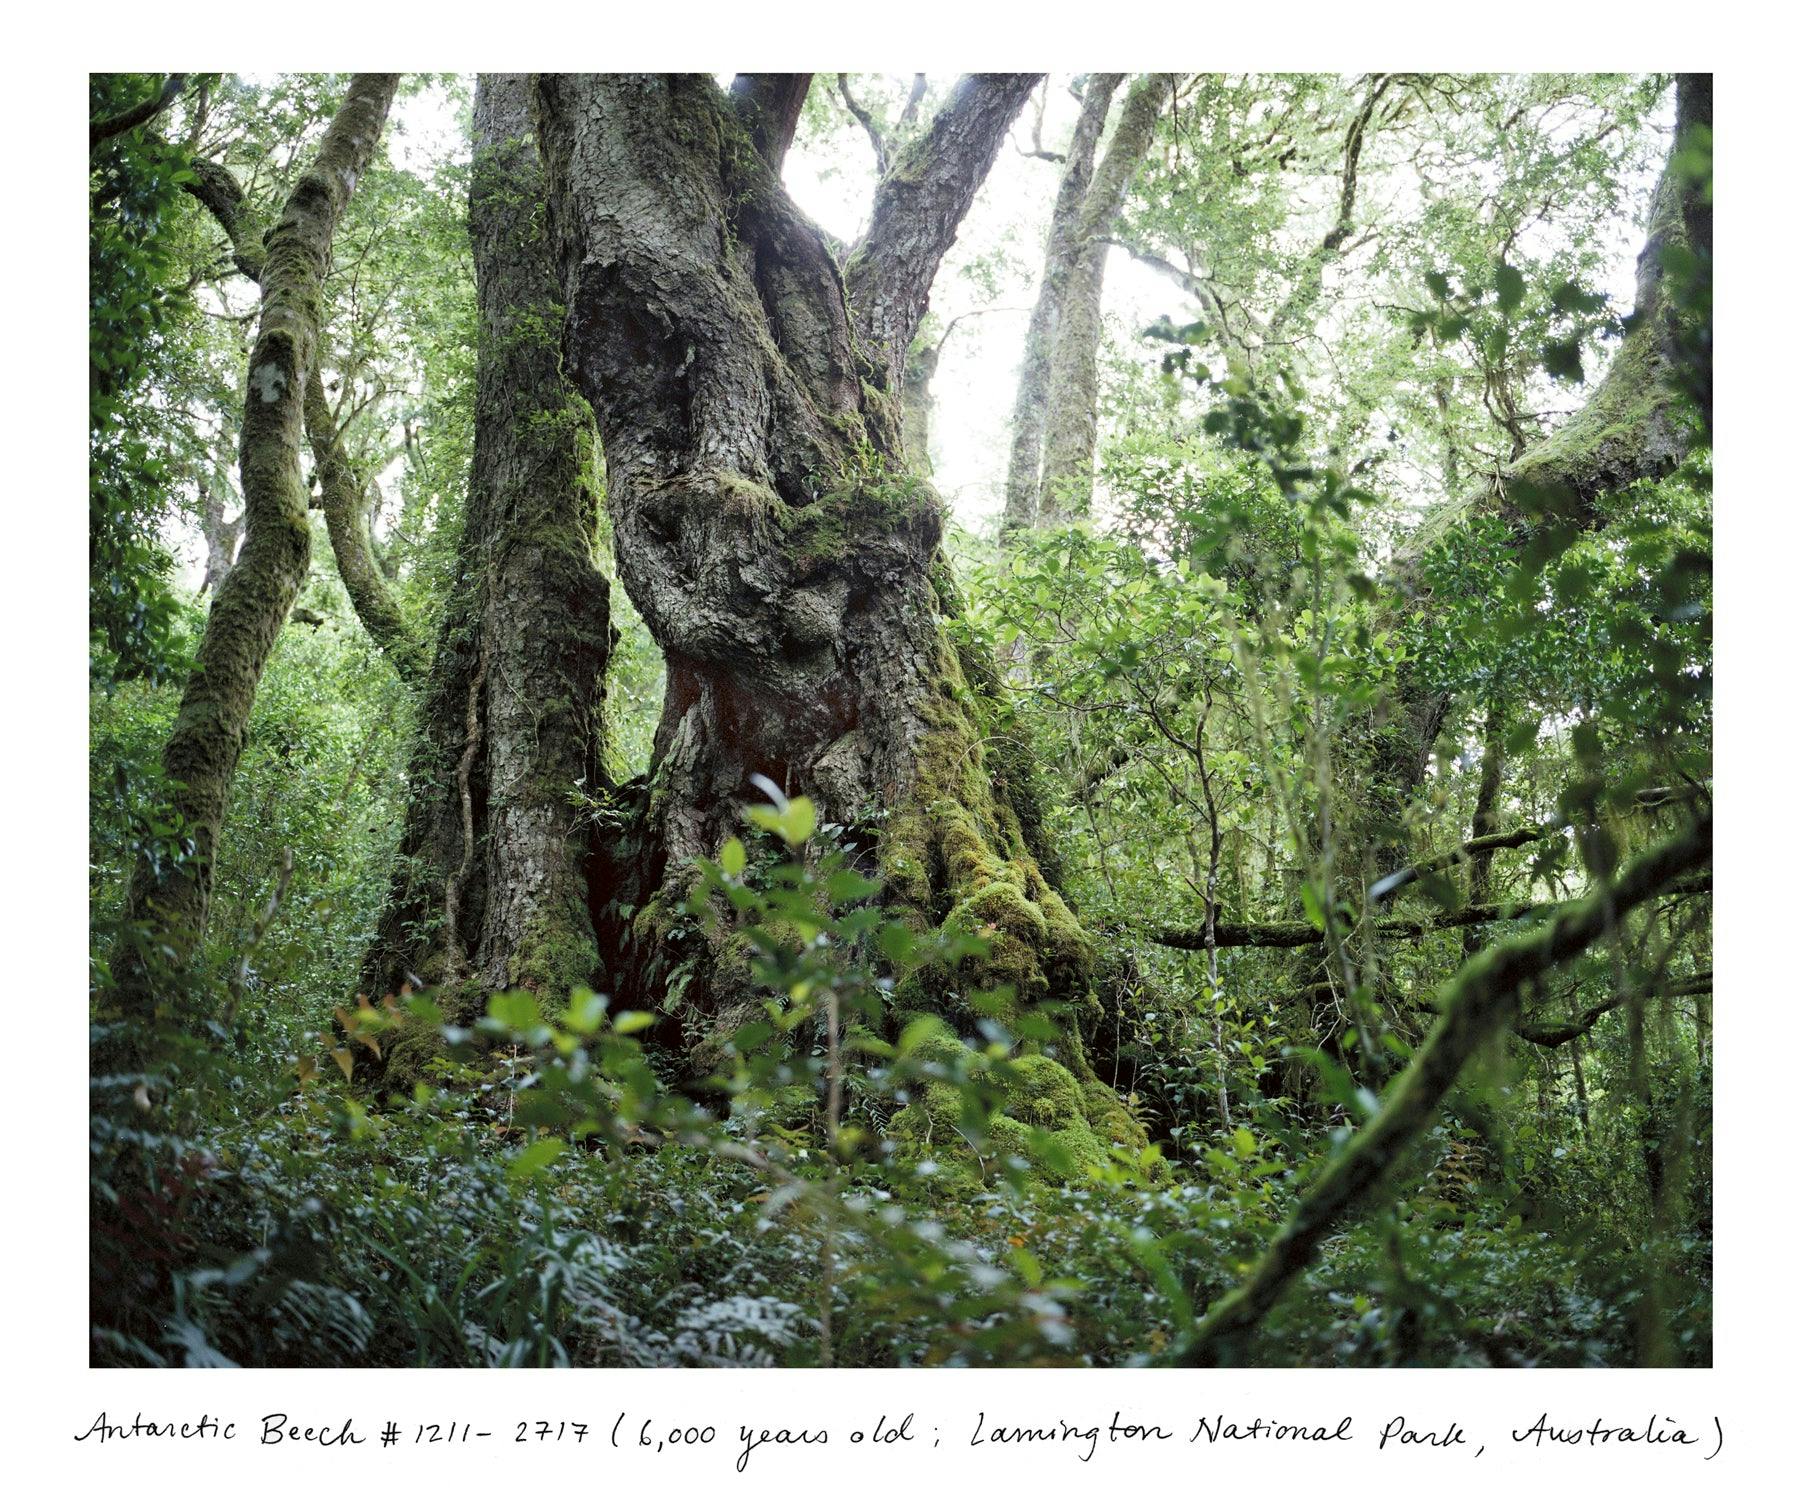 Photography by Rachel Sussman titled "Antarctic Beech #1211-2717 (6,000 years old; Lamington National Park, Queensland".